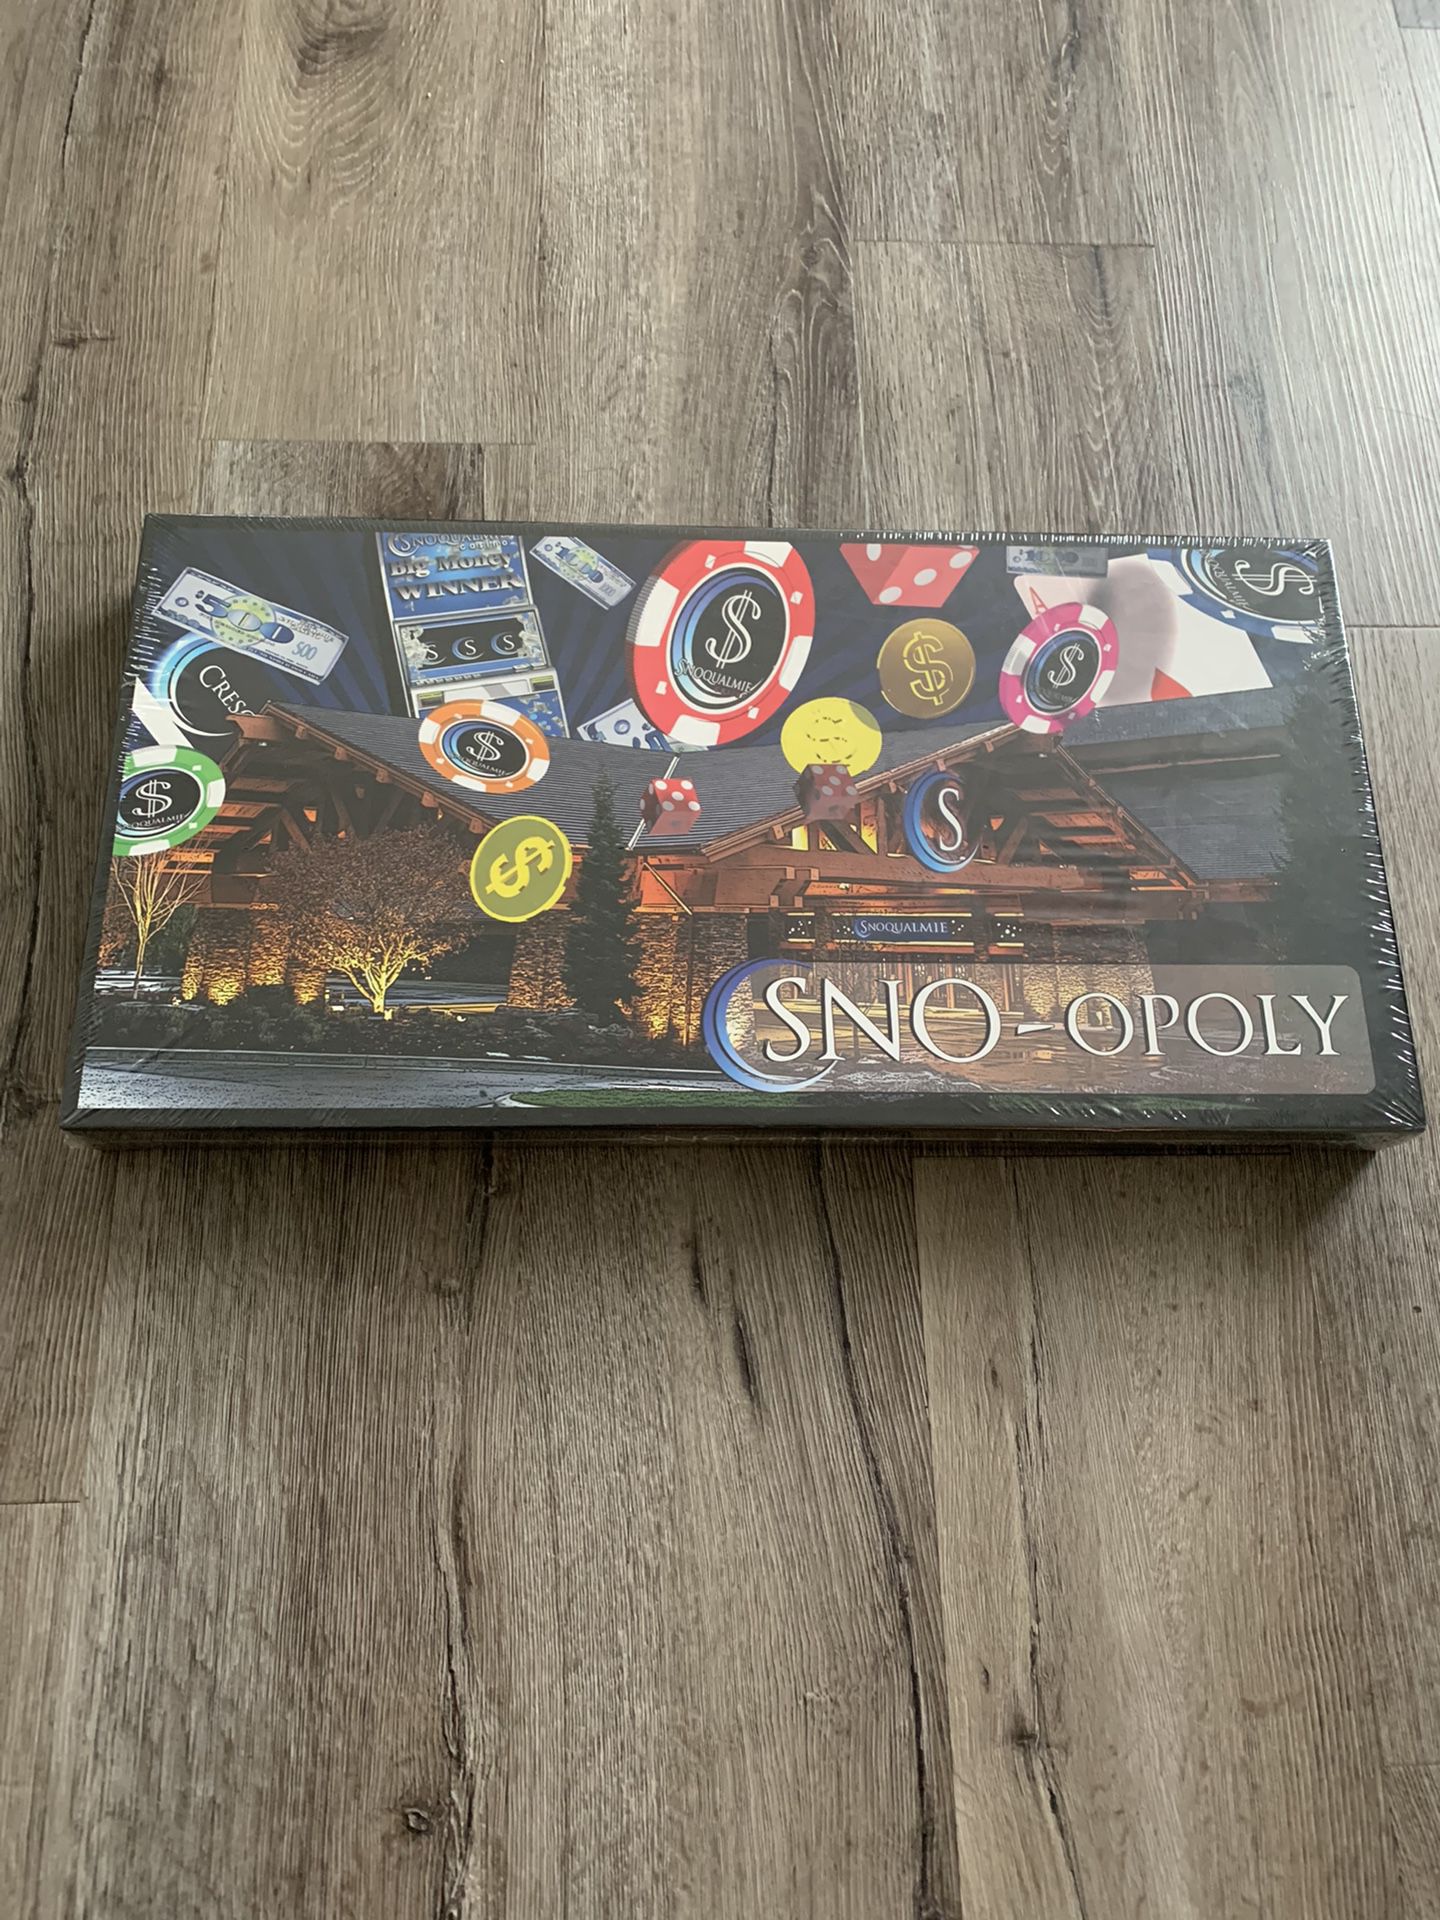 New unopened Sno-Opoly Board Game